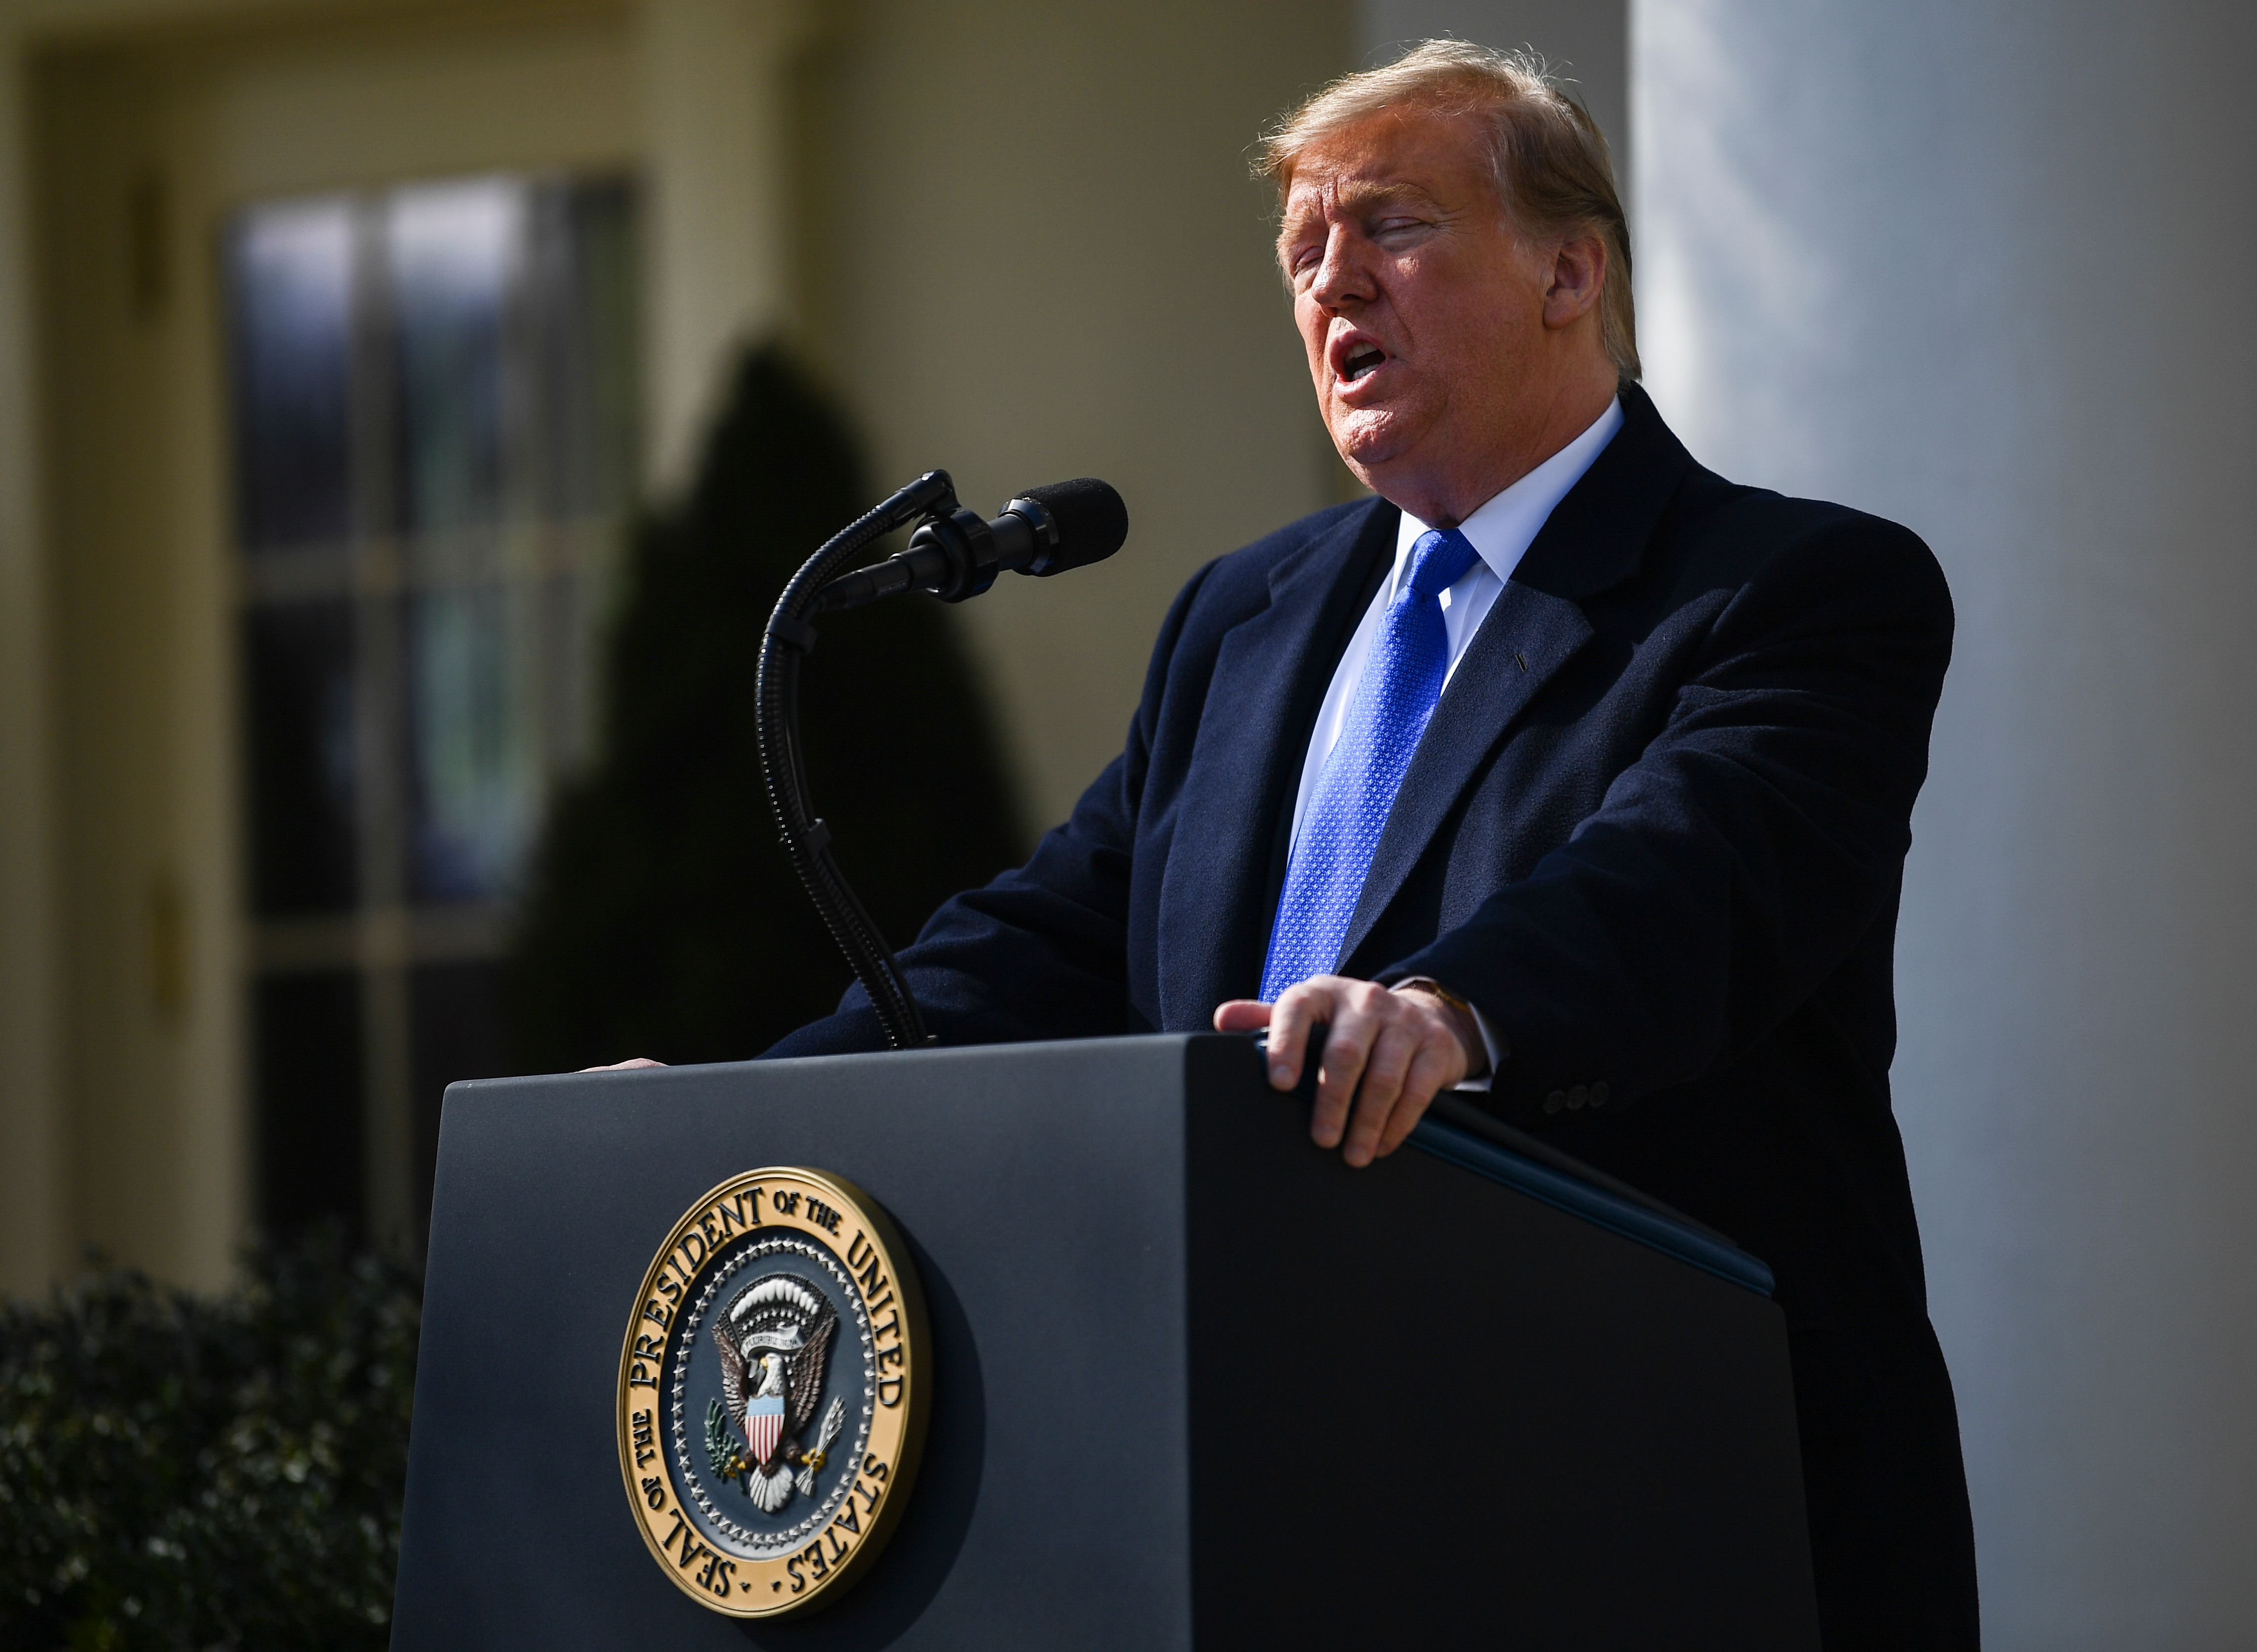 US President Donald Trump delivers remarks in the Rose Garden at the White House in Washington, DC on February 15, 2019. - President Donald Trump, repeating his claim that "walls work," announced that he will declare a national emergency in order to build a barrier on the US-Mexico border without funding from Congress. (Photo by BRENDAN SMIALOWSKI/AFP/Getty Images)